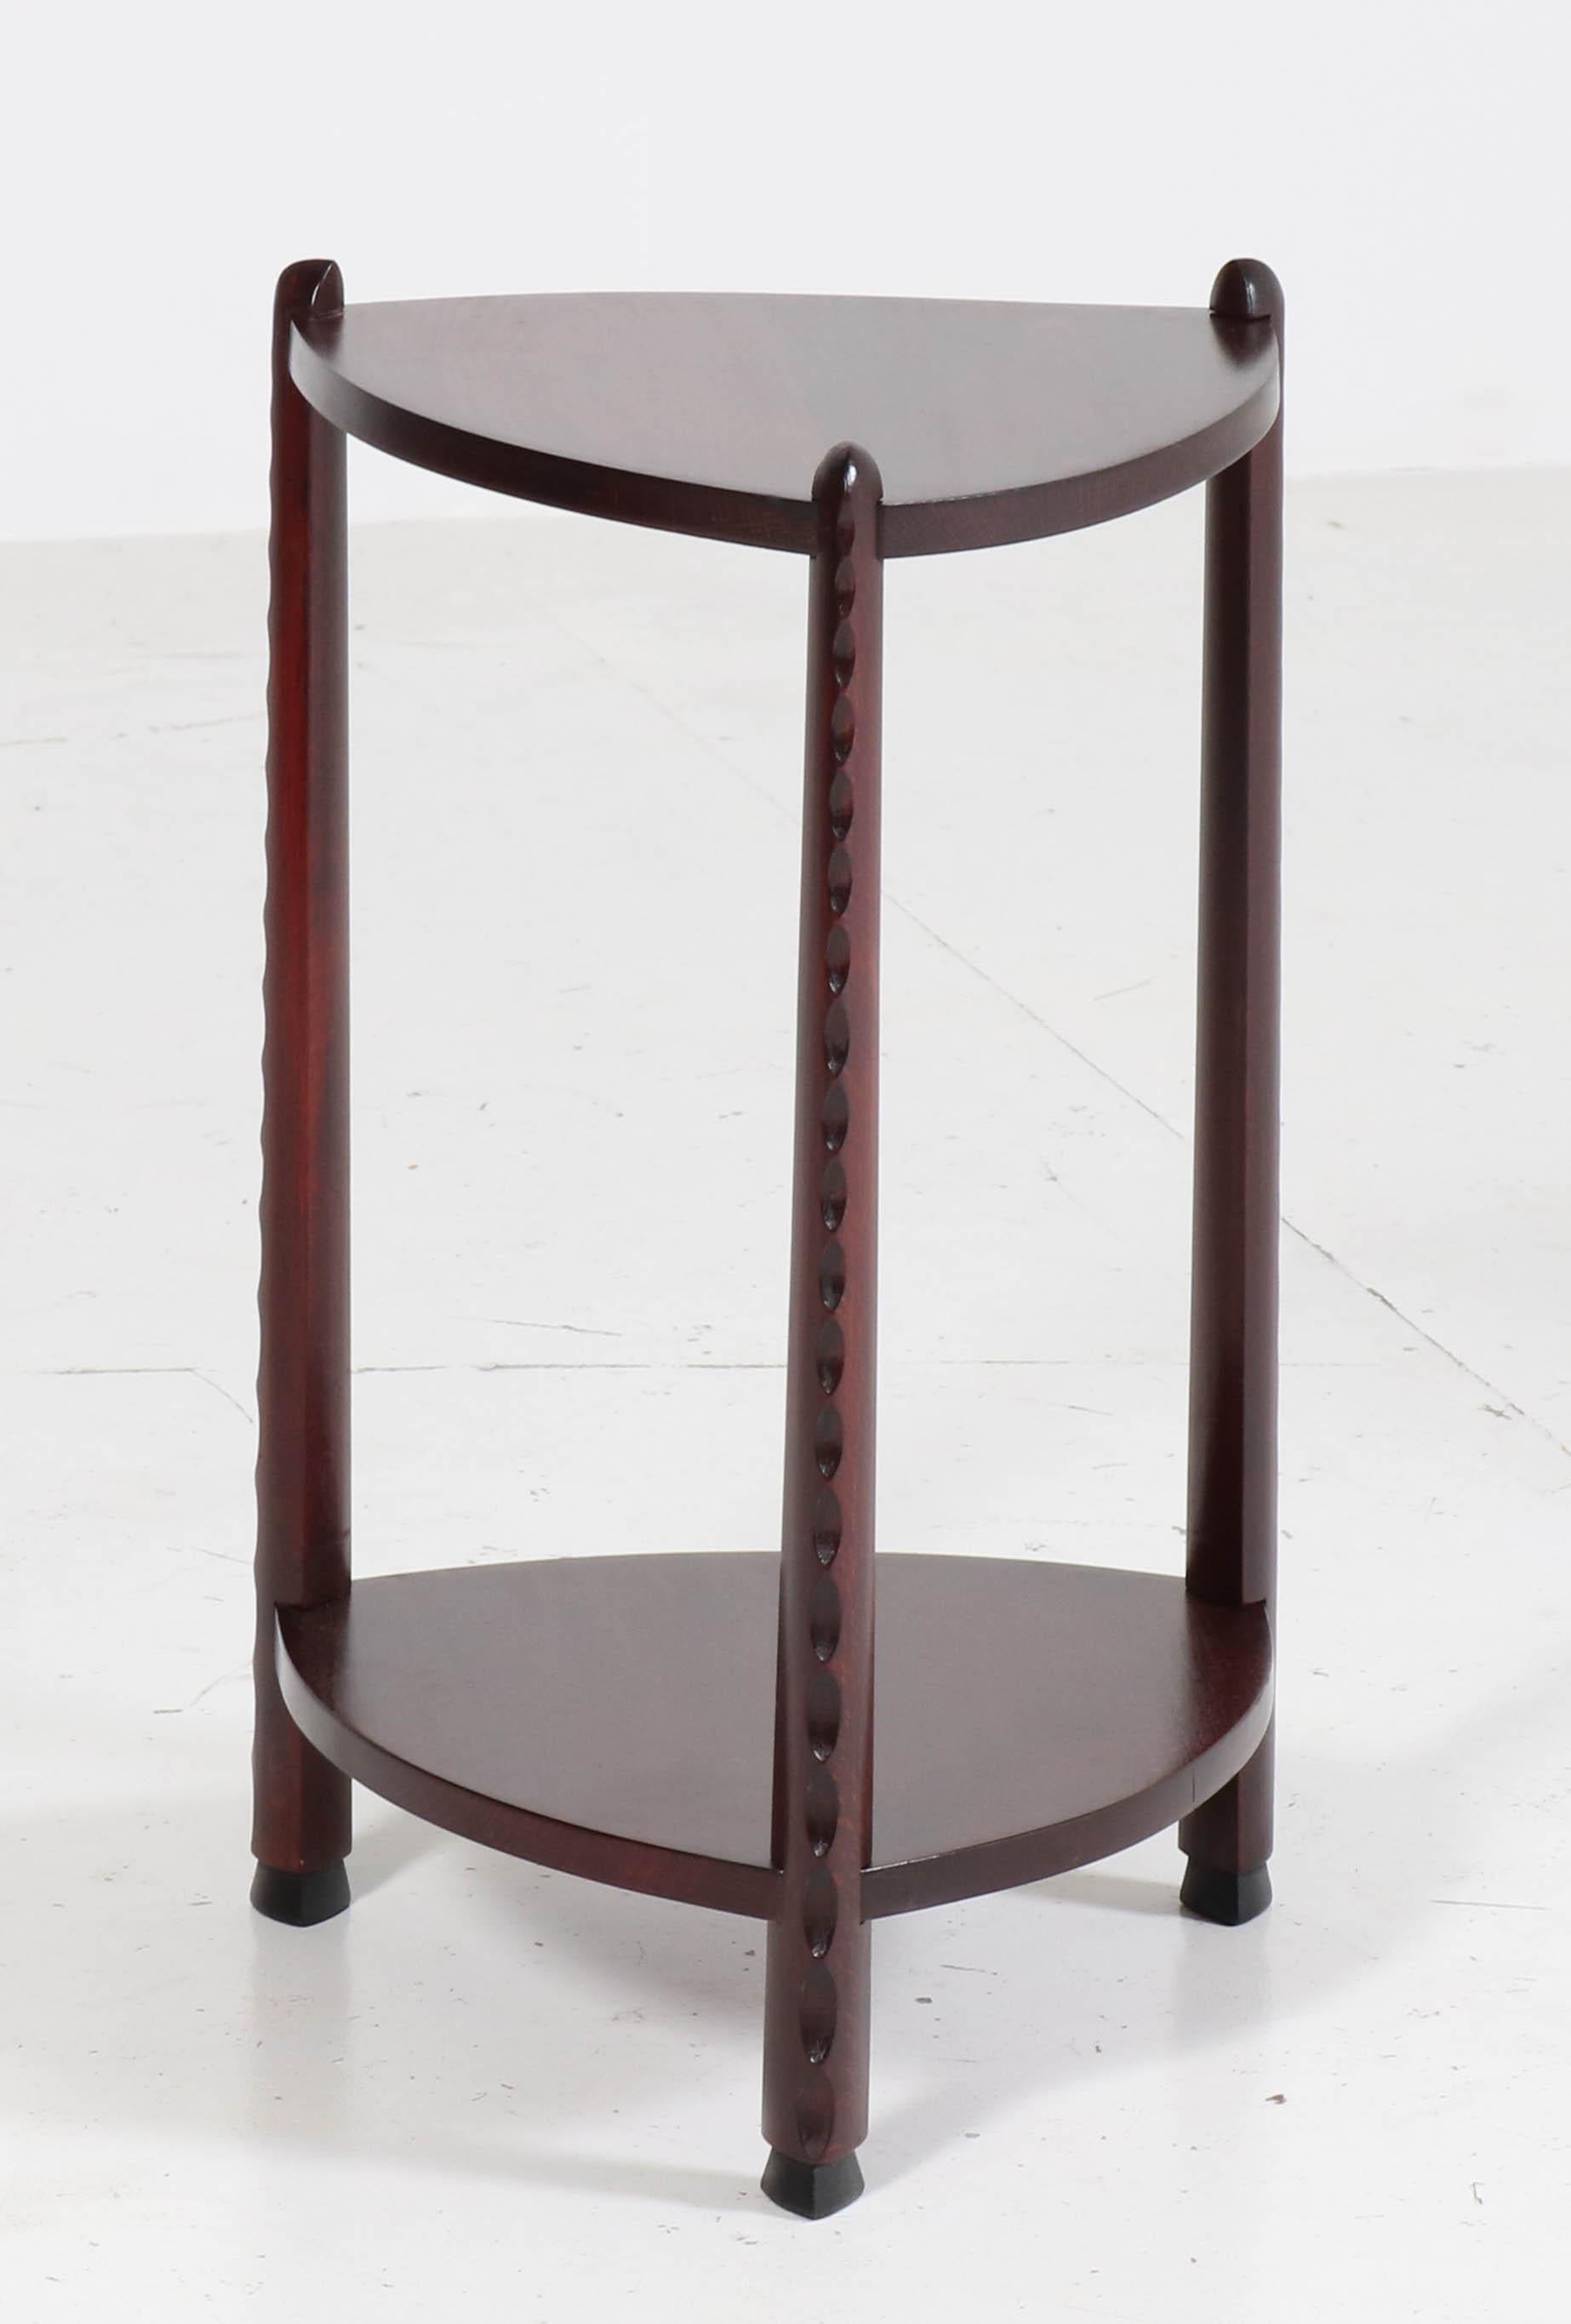 Magnificent and very rare Art Deco Amsterdam School side table.
Design attributed to Piet Kramer.
Striking Dutch design from the twenties.
Stained beech with a mahogany color.
Wonderful lining on the three legs.
In very good condition with